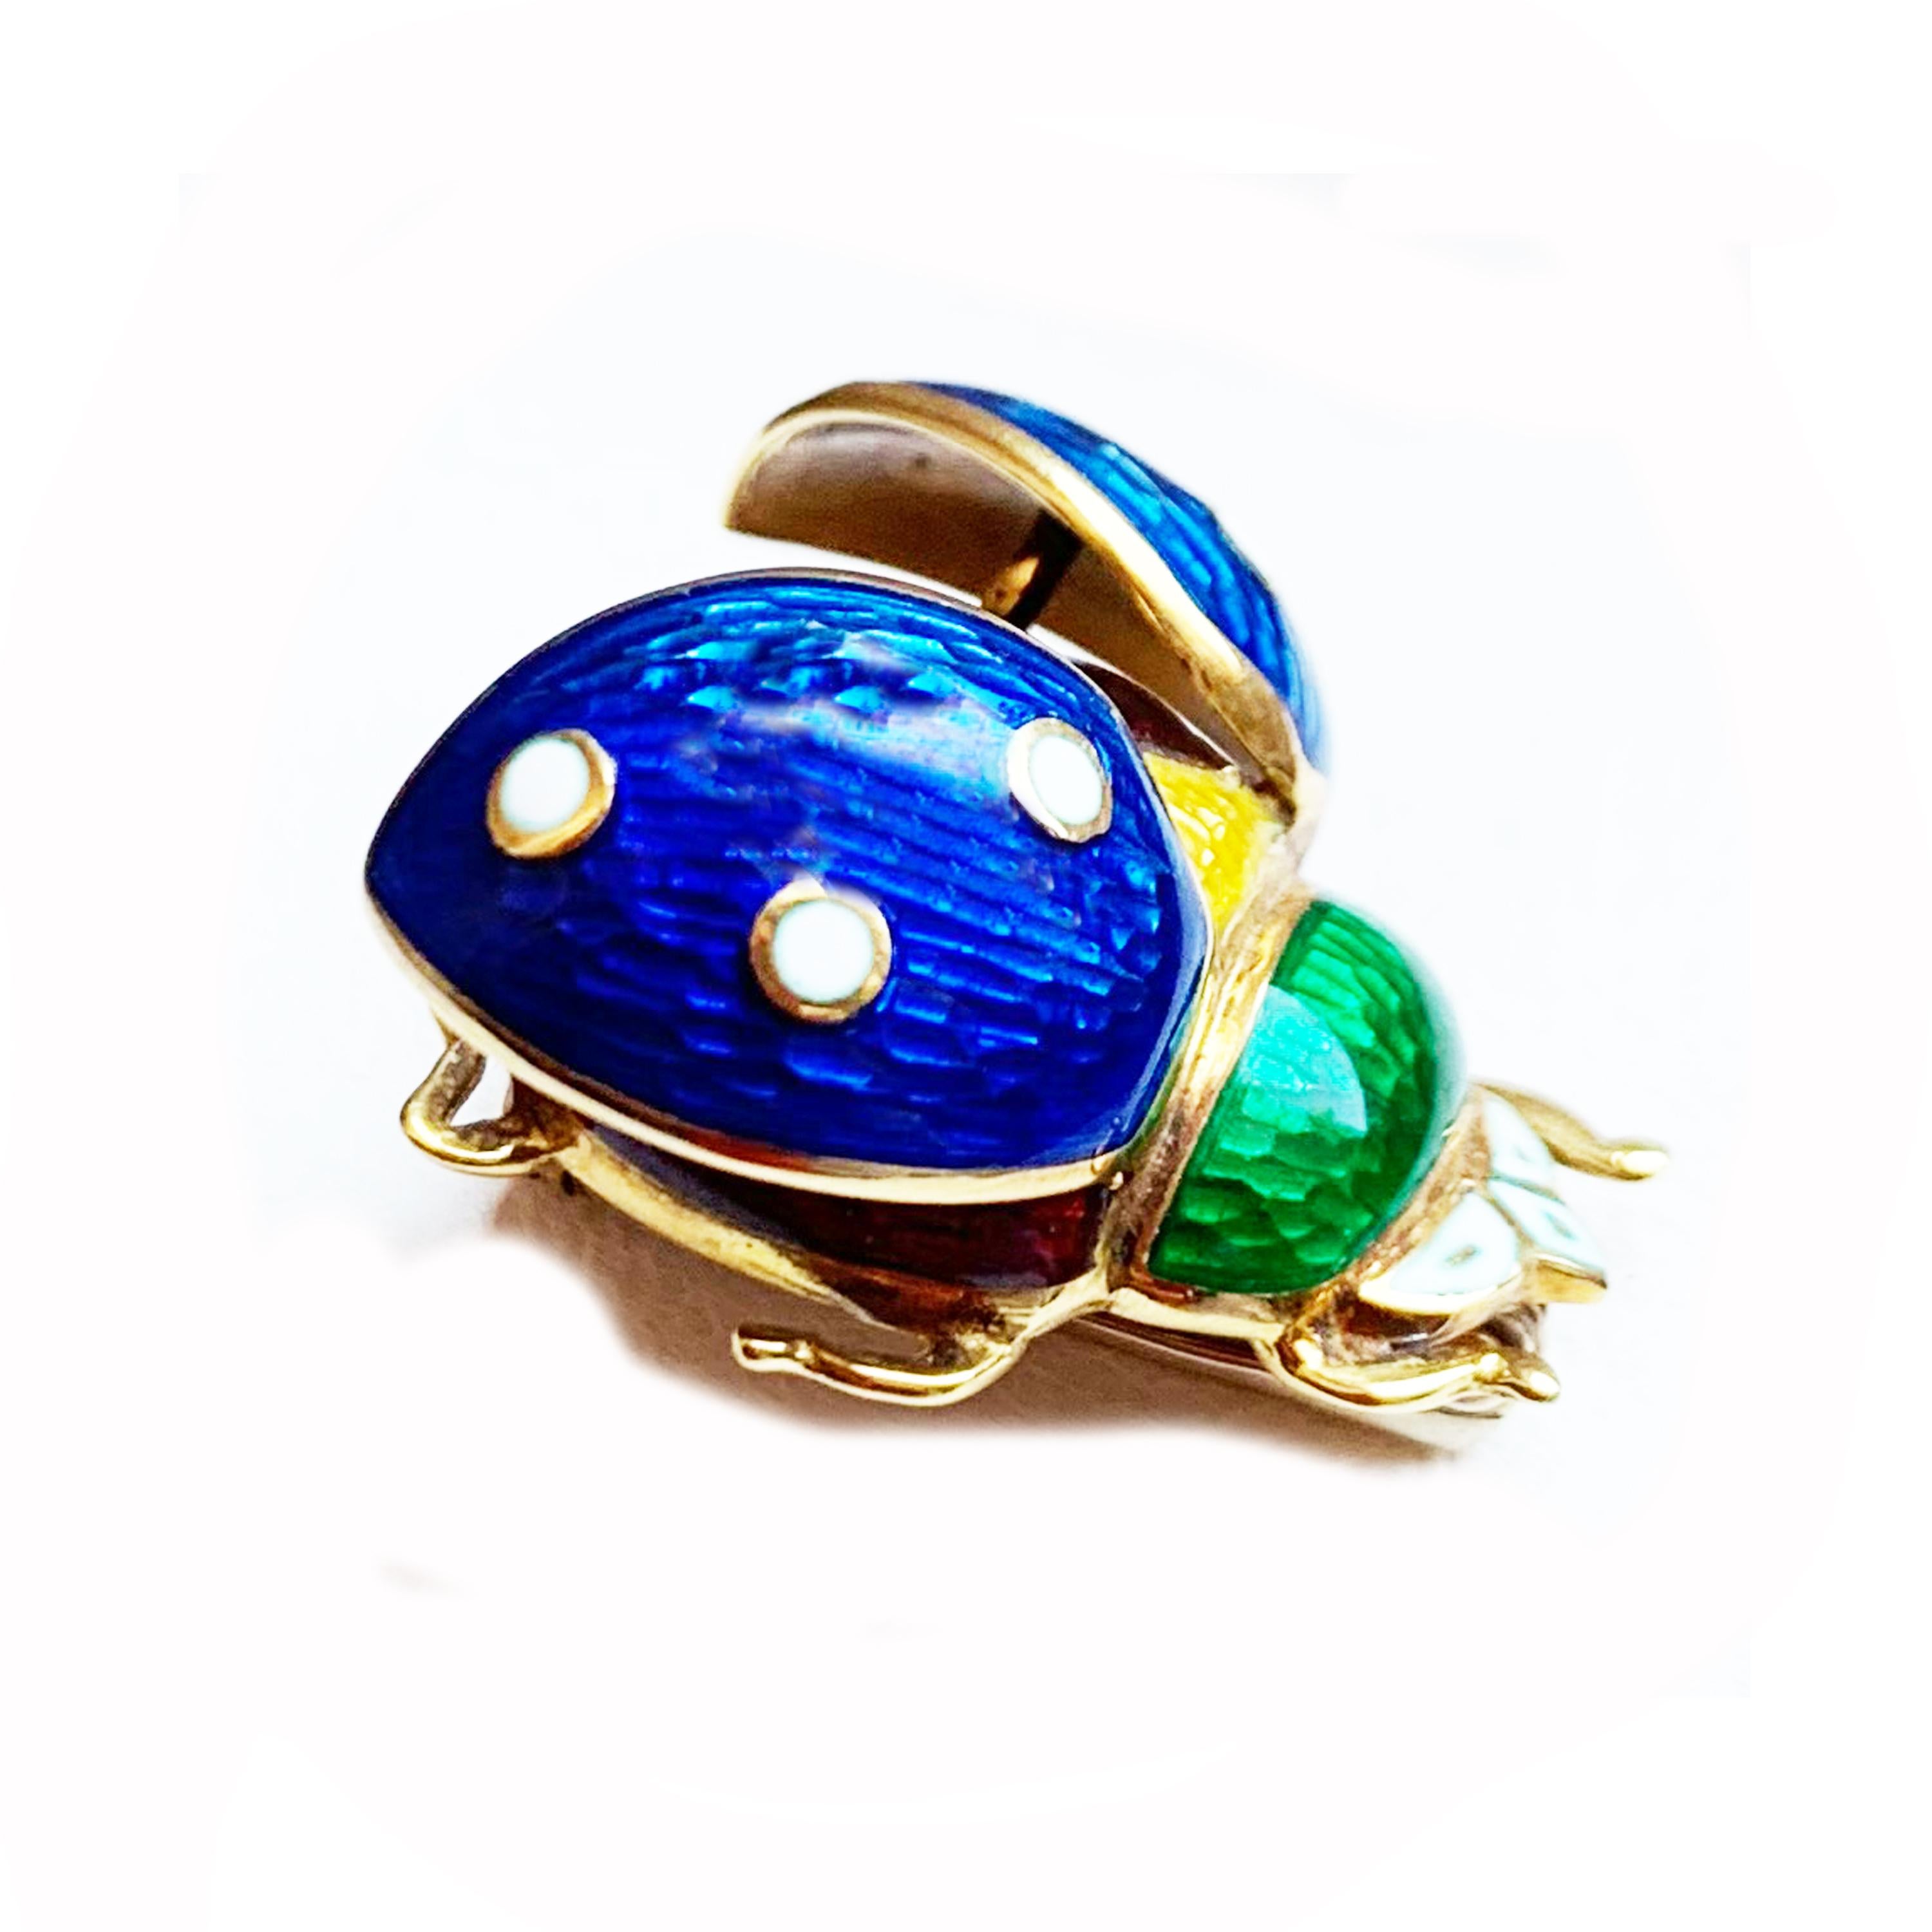 This 18 Kt gold and enamel brooch depicting a ladybug with open wings was handcrafted by a talented Italian goldsmith.
Symbol of good luck, the ladybug is said to give blessings to those she encounters. Master in the art of metamorphosis, she